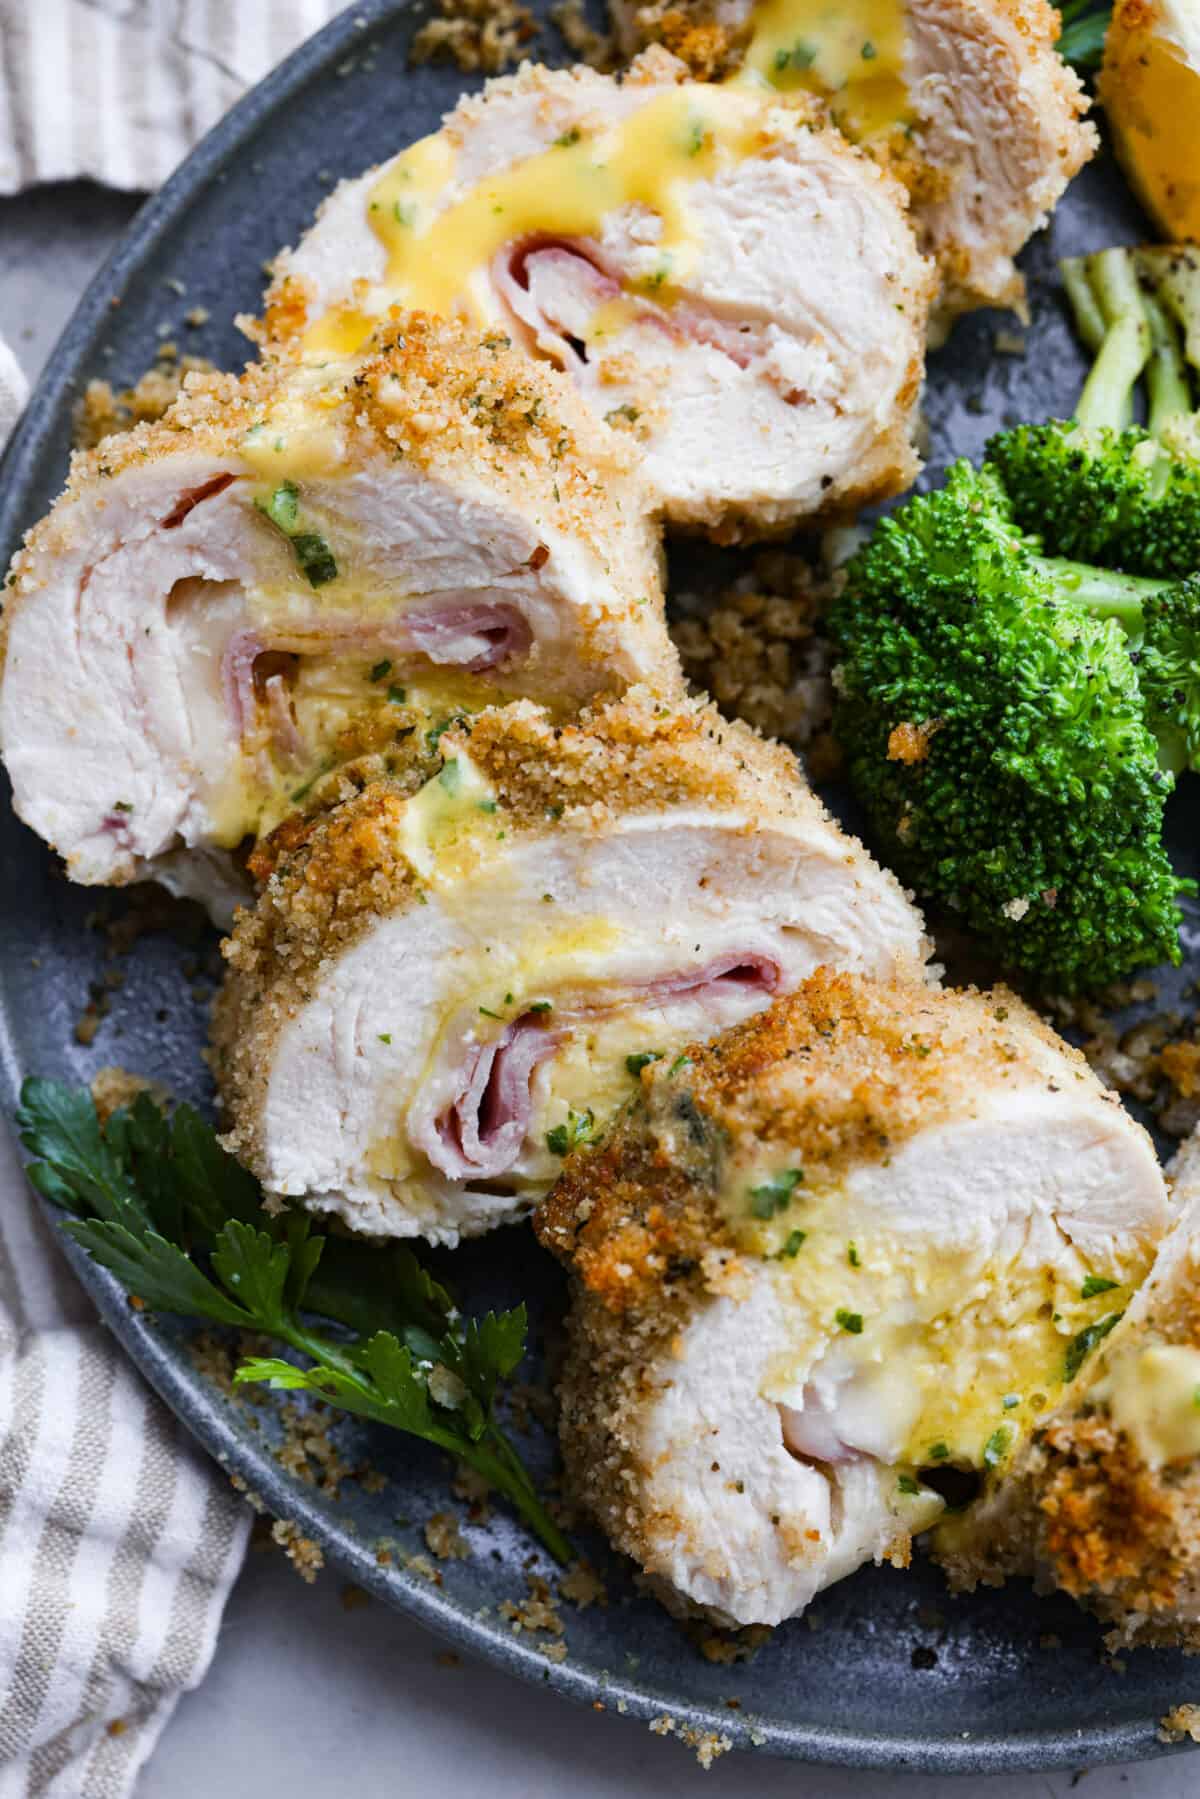 Top view of sliced chicken cordon bleu on a gray plate drizzled with sauce and broccoli on the side.